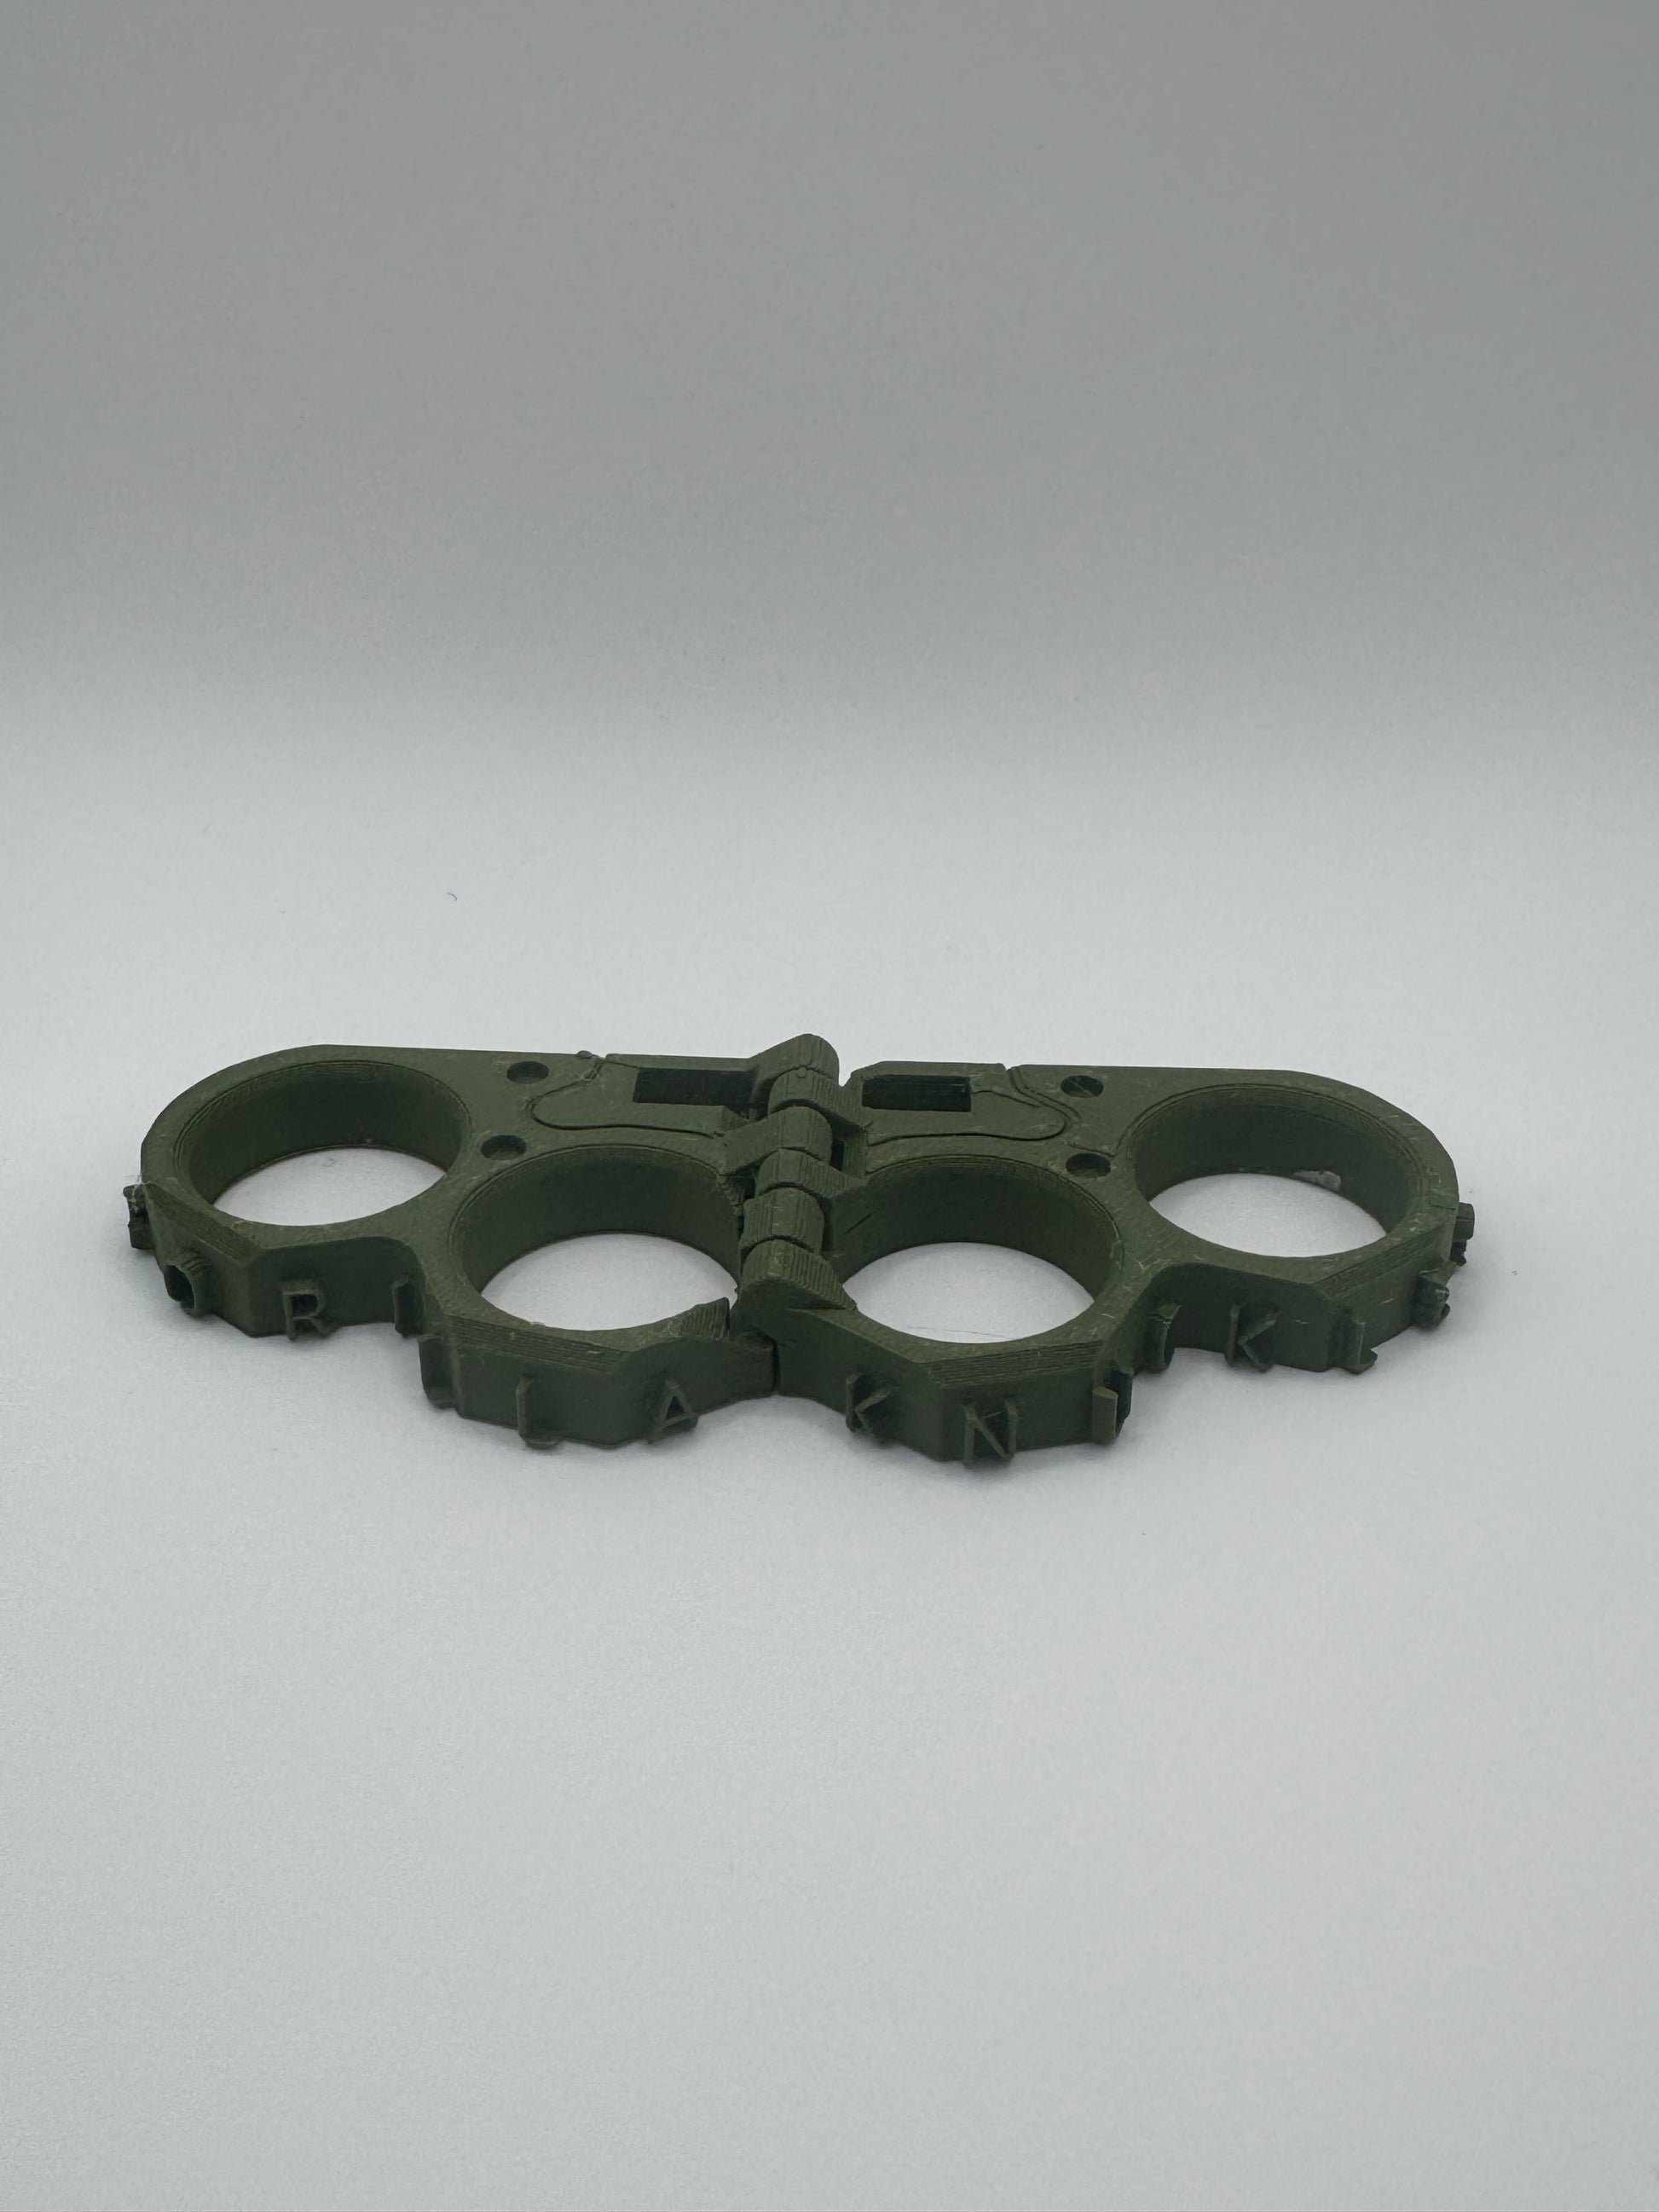 Are Brass Knuckles Legal in Canada?